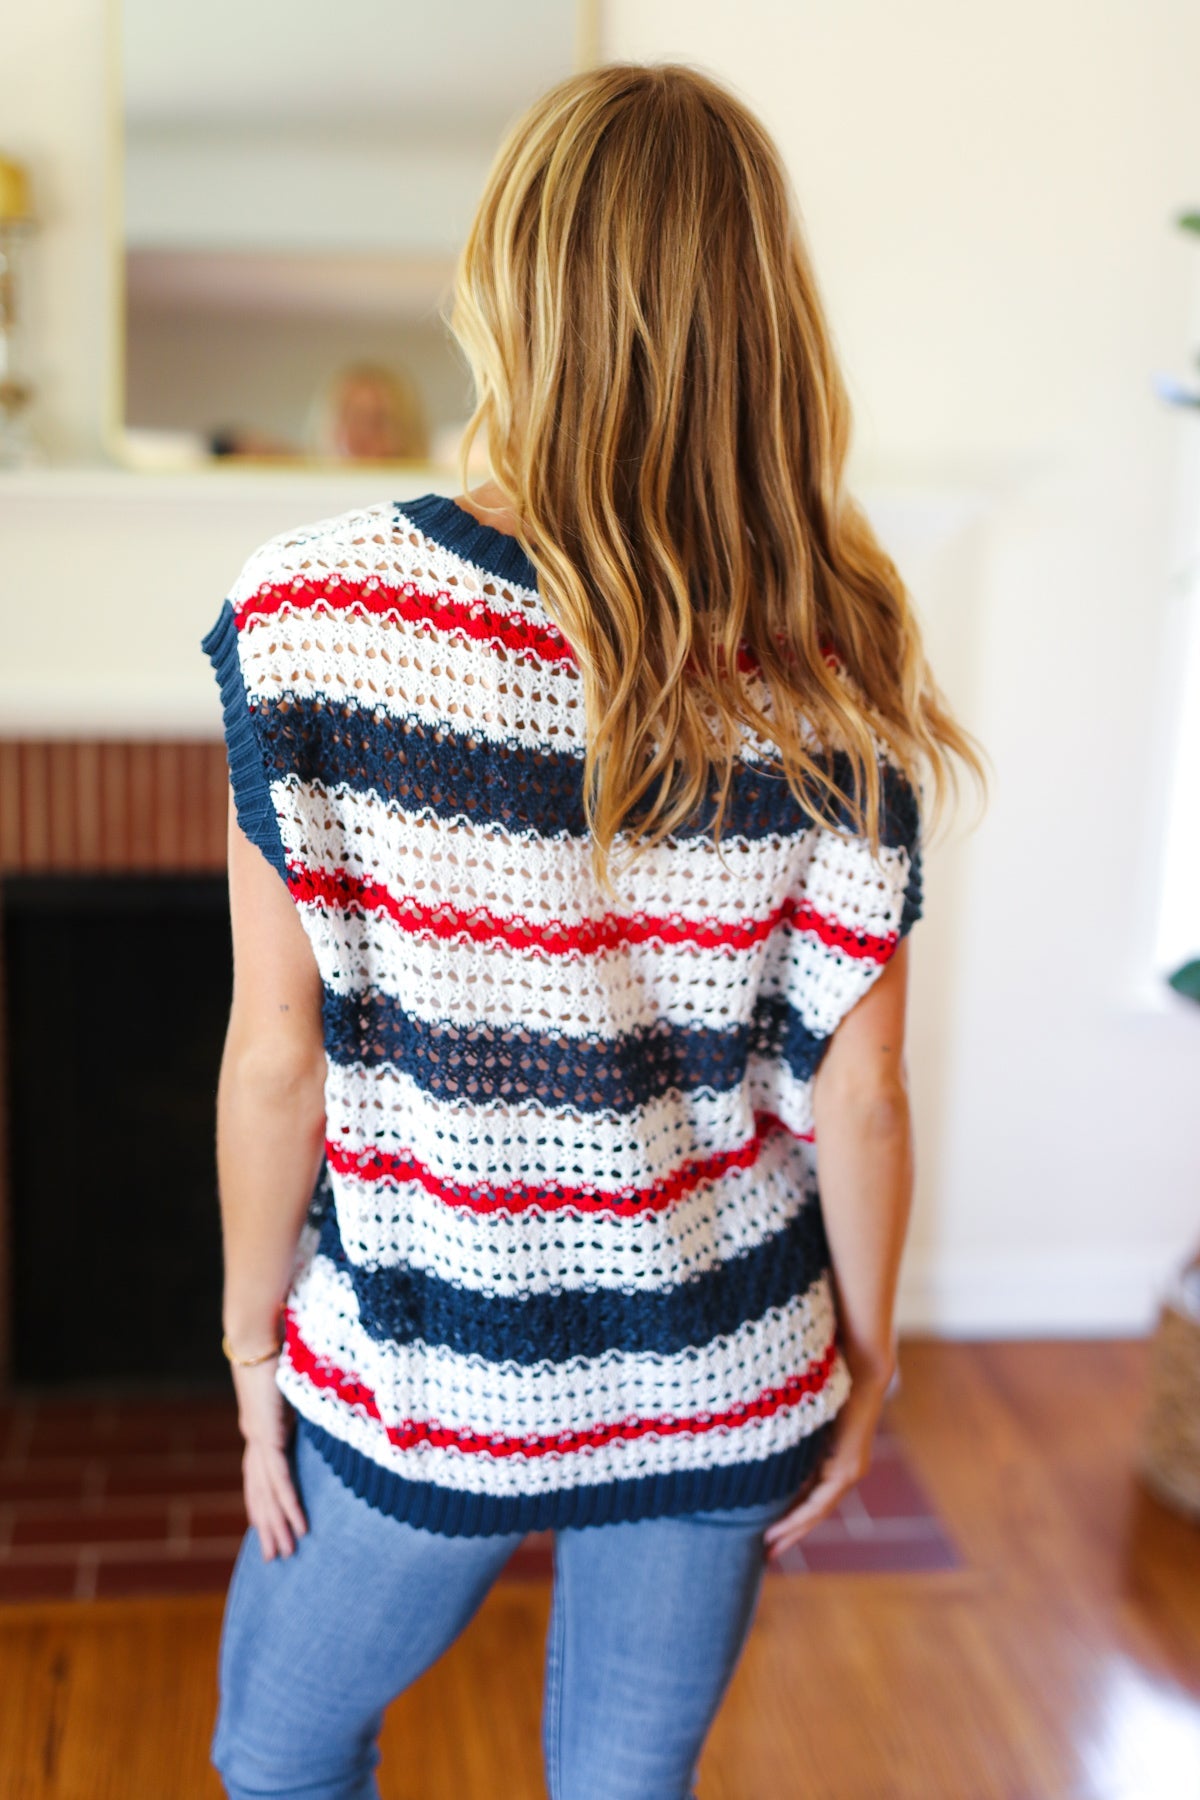 Holiday Ready Red White & Blue Striped Crochet Top